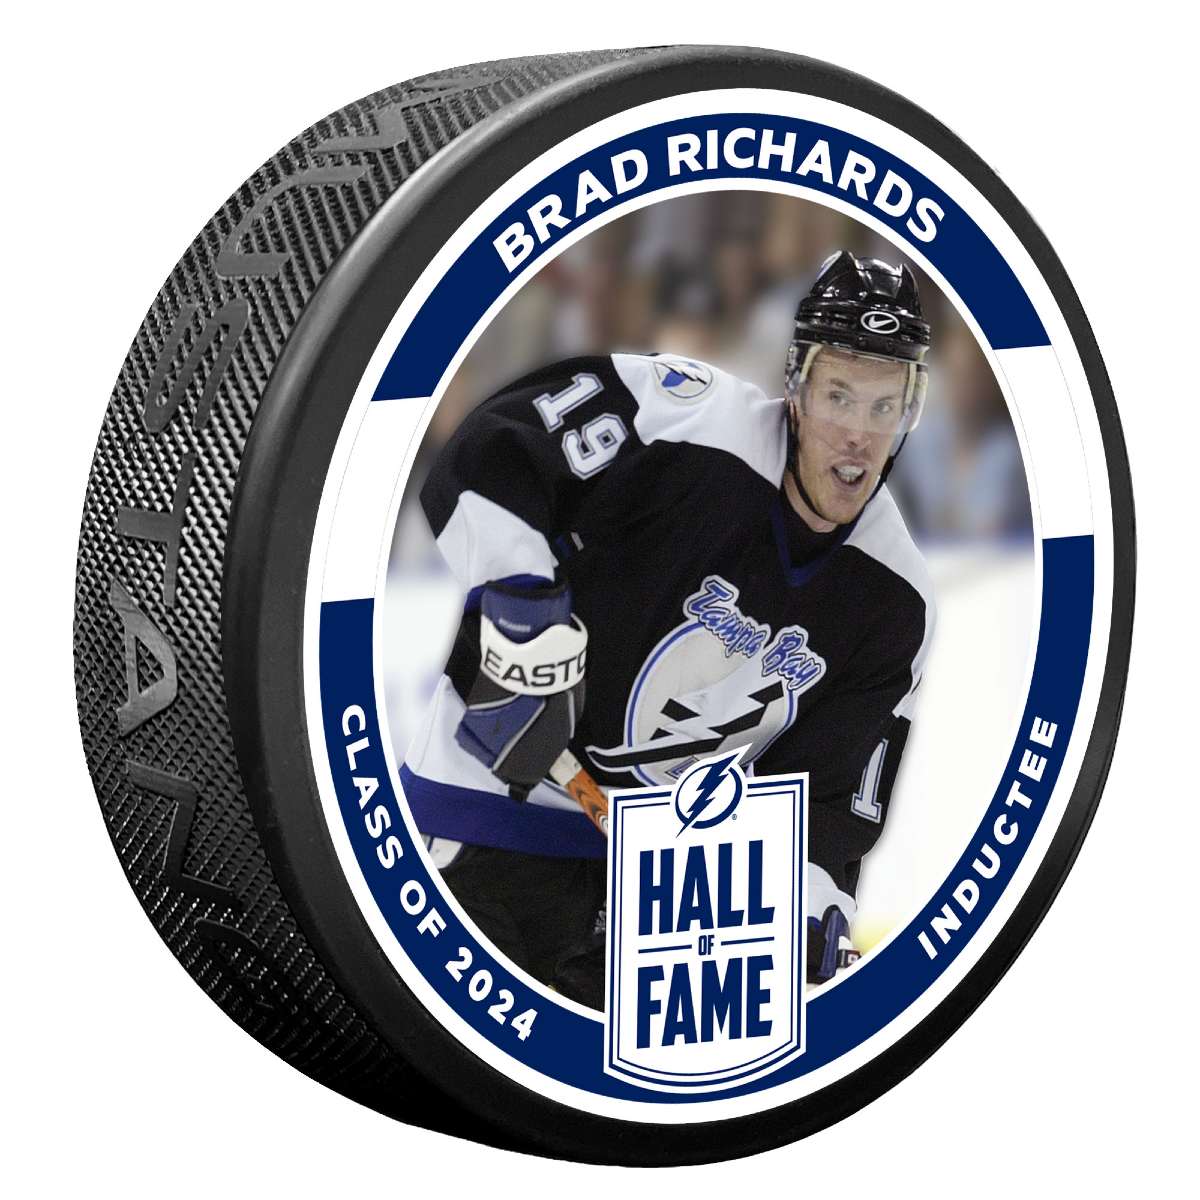 Brad Richards Lightning Hall of Fame Limited Edition 3D Embossed Puck